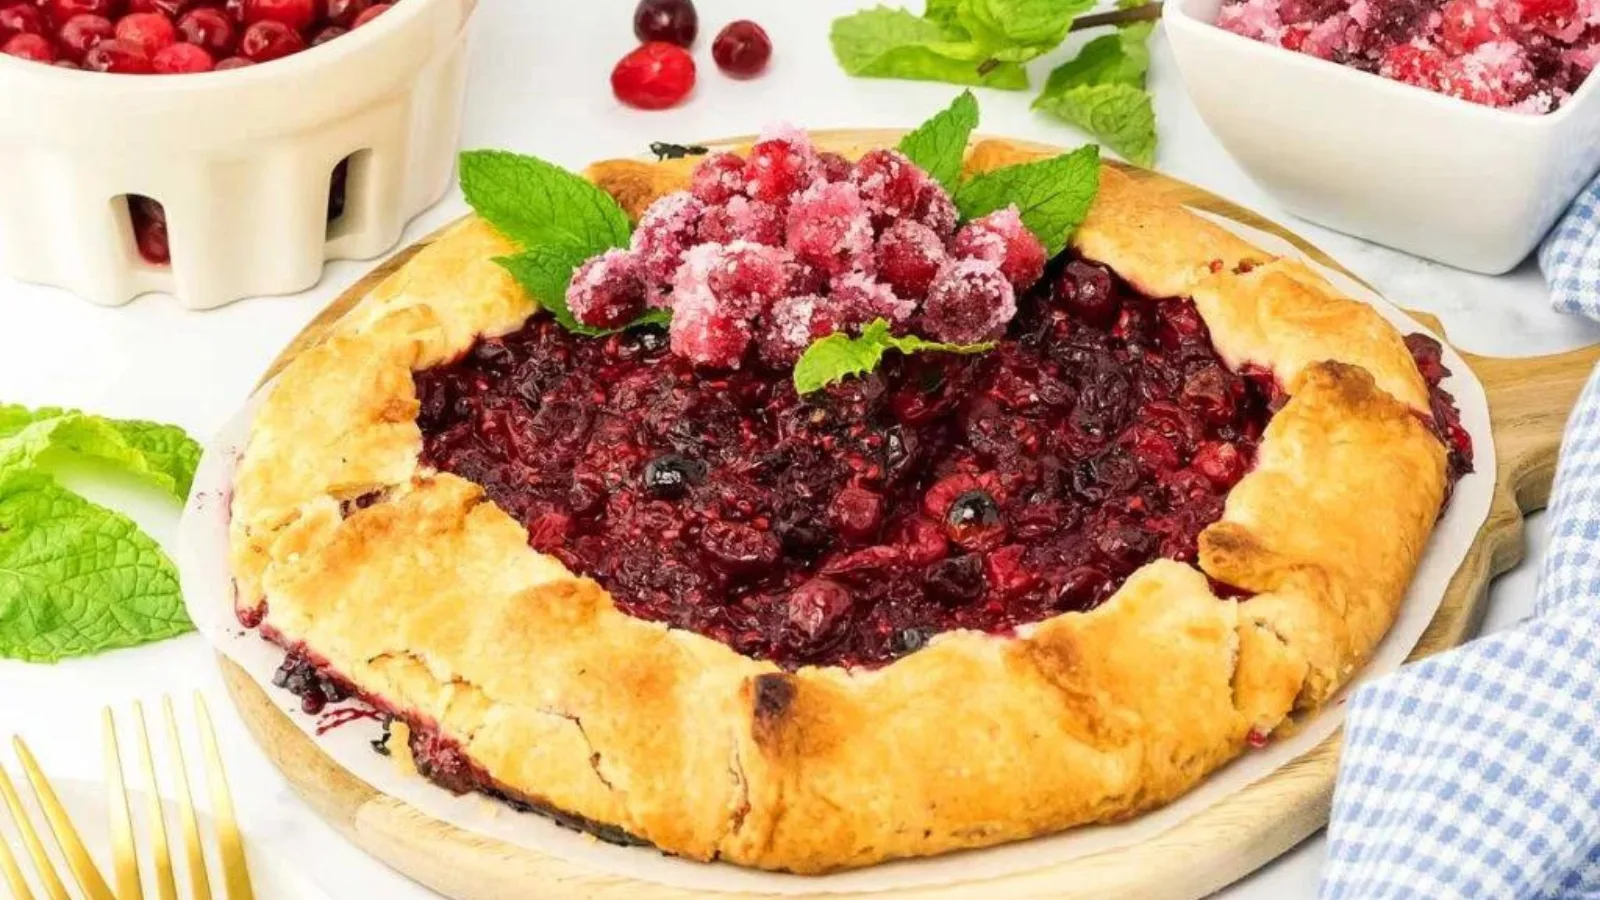 A galette made with cranberries.